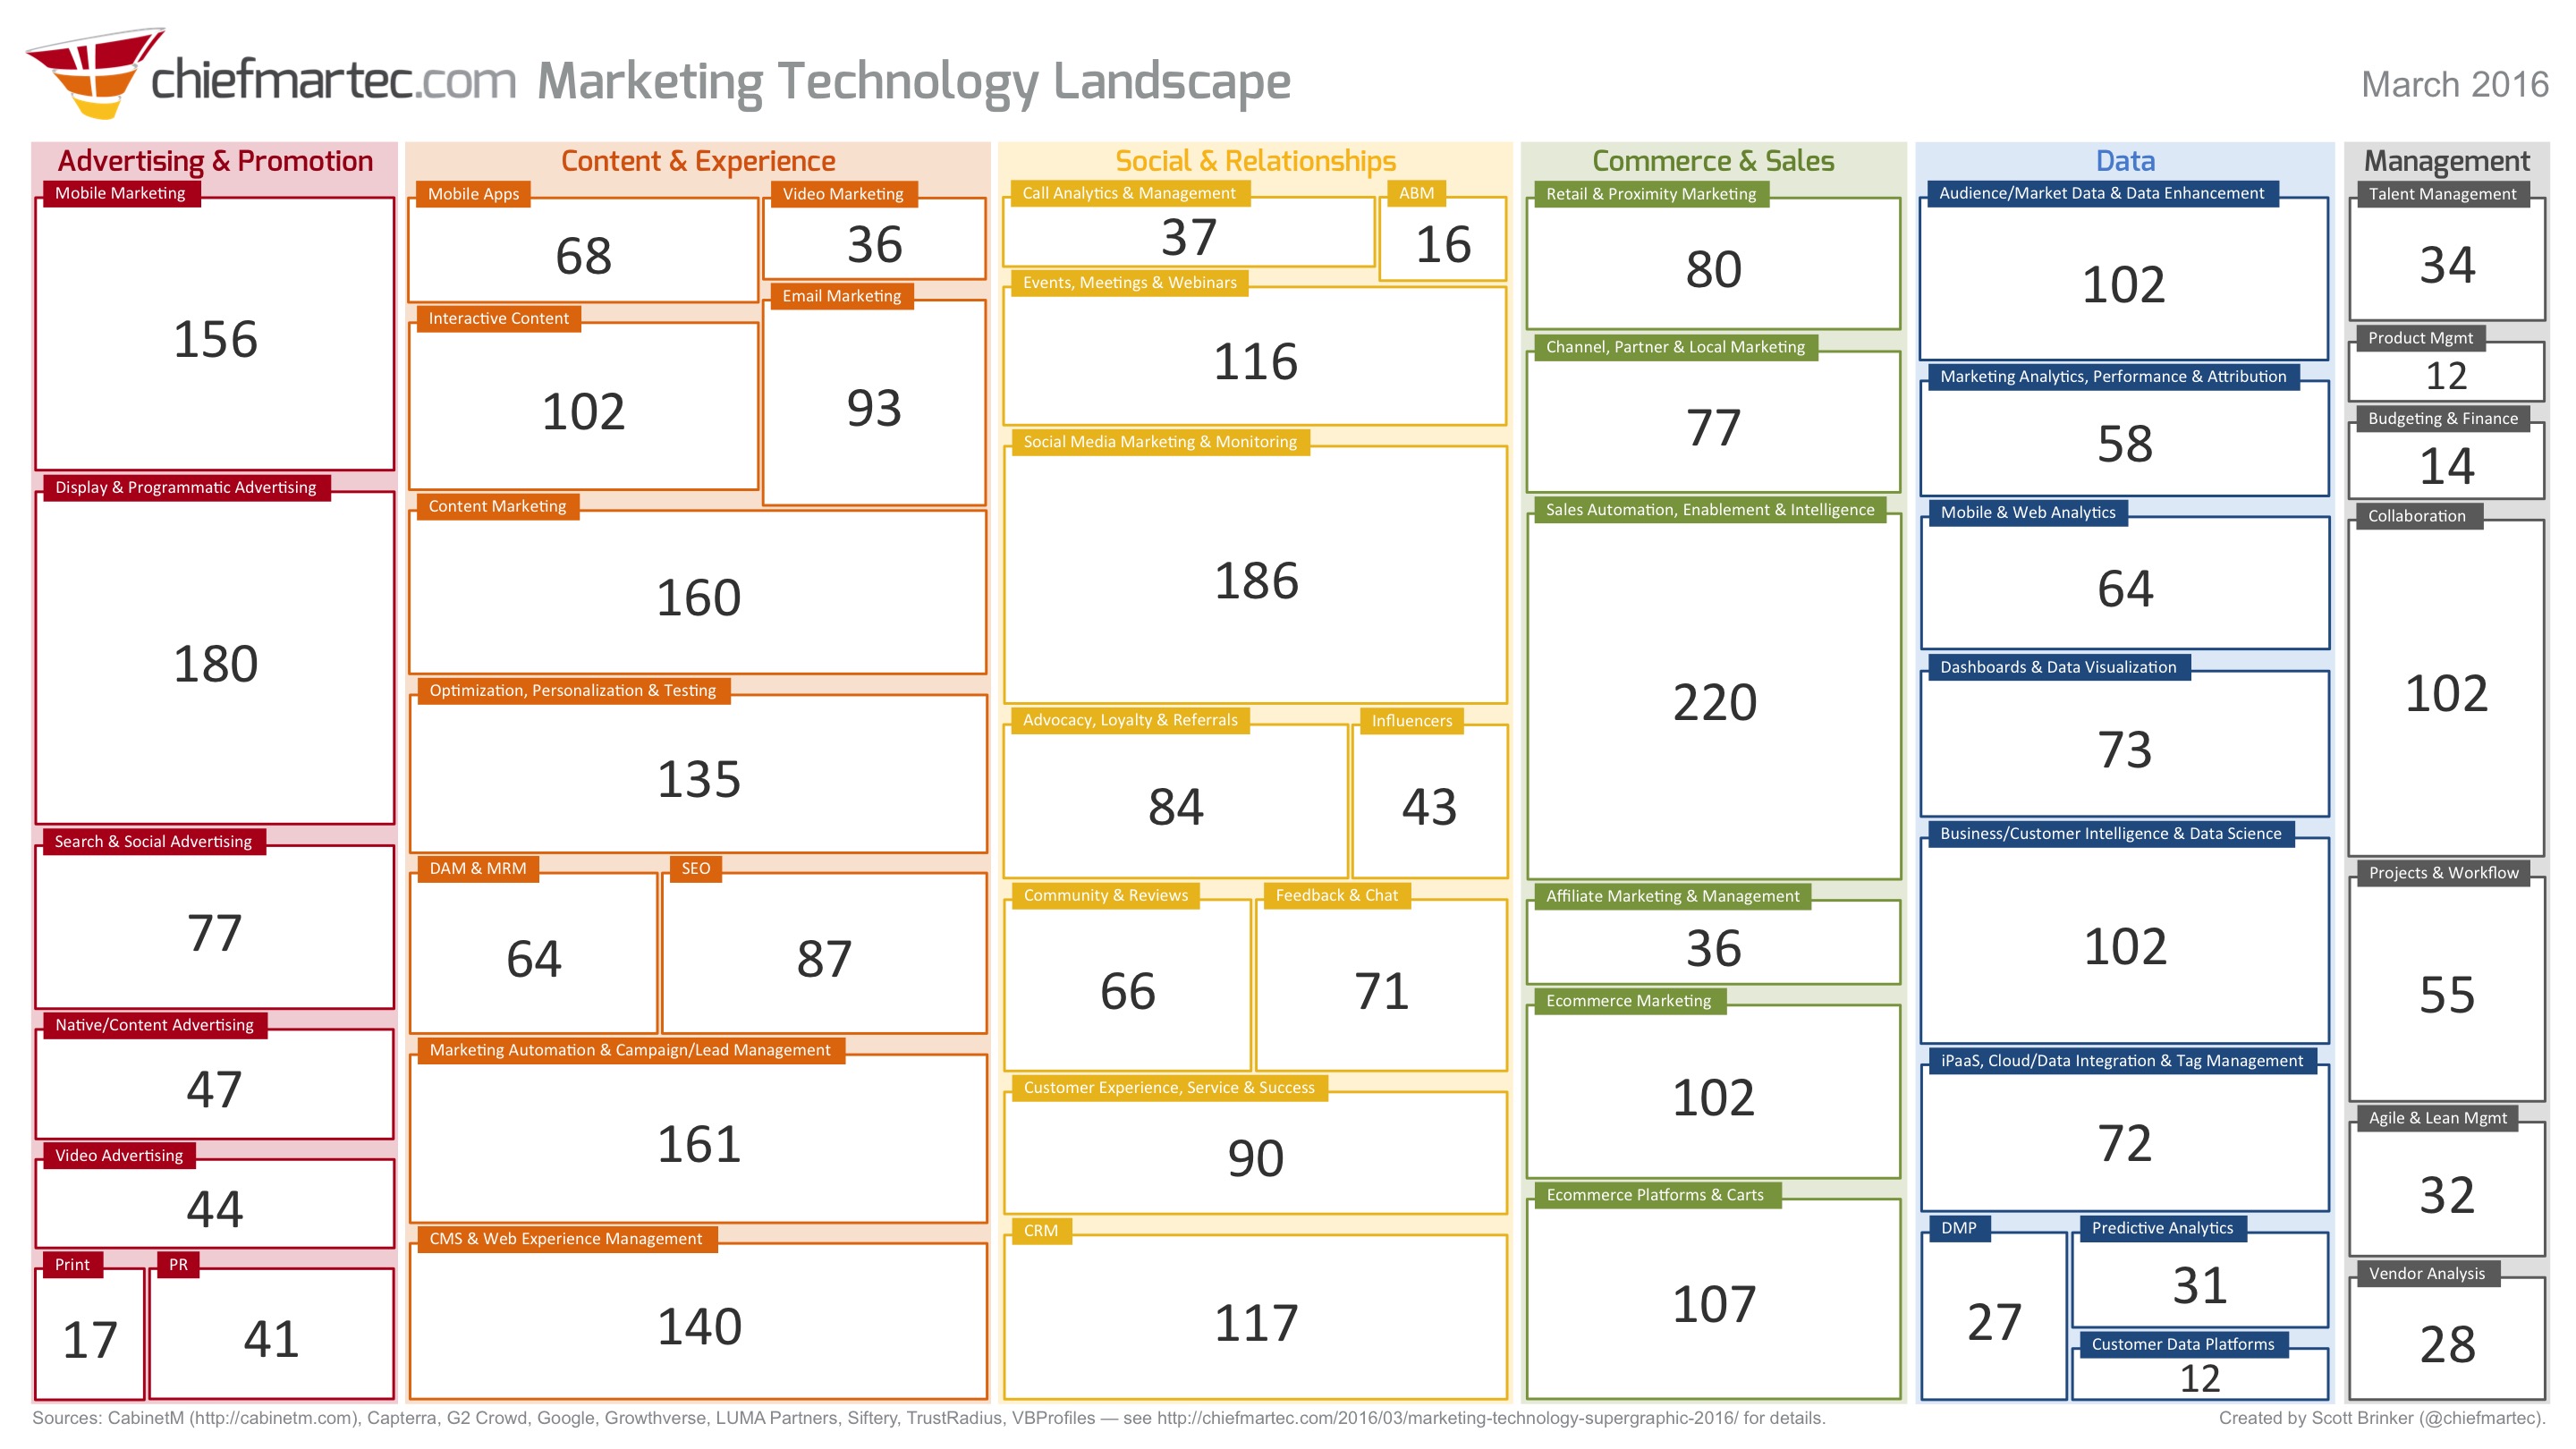 Category Counts of the Marketing Technology Landscape (2016)